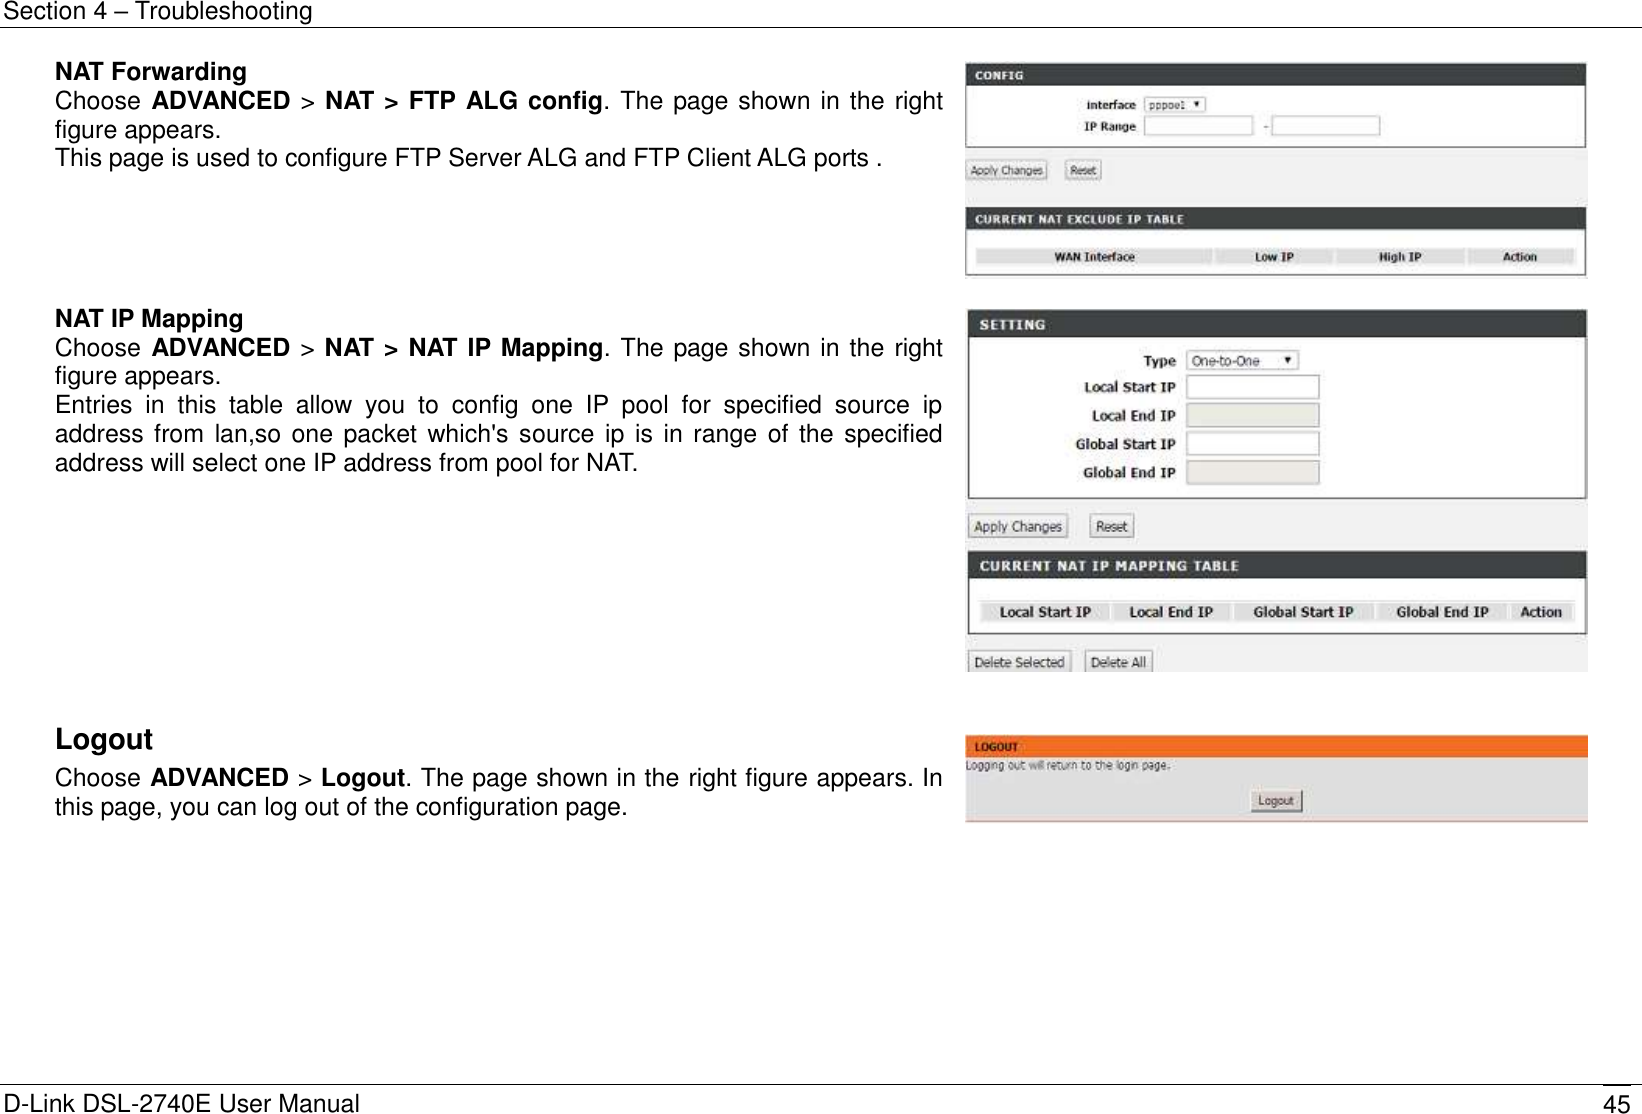 Section 4 – Troubleshooting D-Link DSL-2740E User Manual 45 NAT Forwarding Choose ADVANCED &gt; NAT &gt; FTP ALG config. The page shown in the right figure appears. This page is used to configure FTP Server ALG and FTP Client ALG ports .   NAT IP Mapping Choose ADVANCED &gt; NAT &gt; NAT IP Mapping. The page shown in the right figure appears. Entries  in  this  table  allow  you  to  config  one  IP  pool  for  specified  source  ip address from lan,so one packet which&apos;s source ip is  in range of the specified address will select one IP address from pool for NAT.    Logout Choose ADVANCED &gt; Logout. The page shown in the right figure appears. In this page, you can log out of the configuration page.         